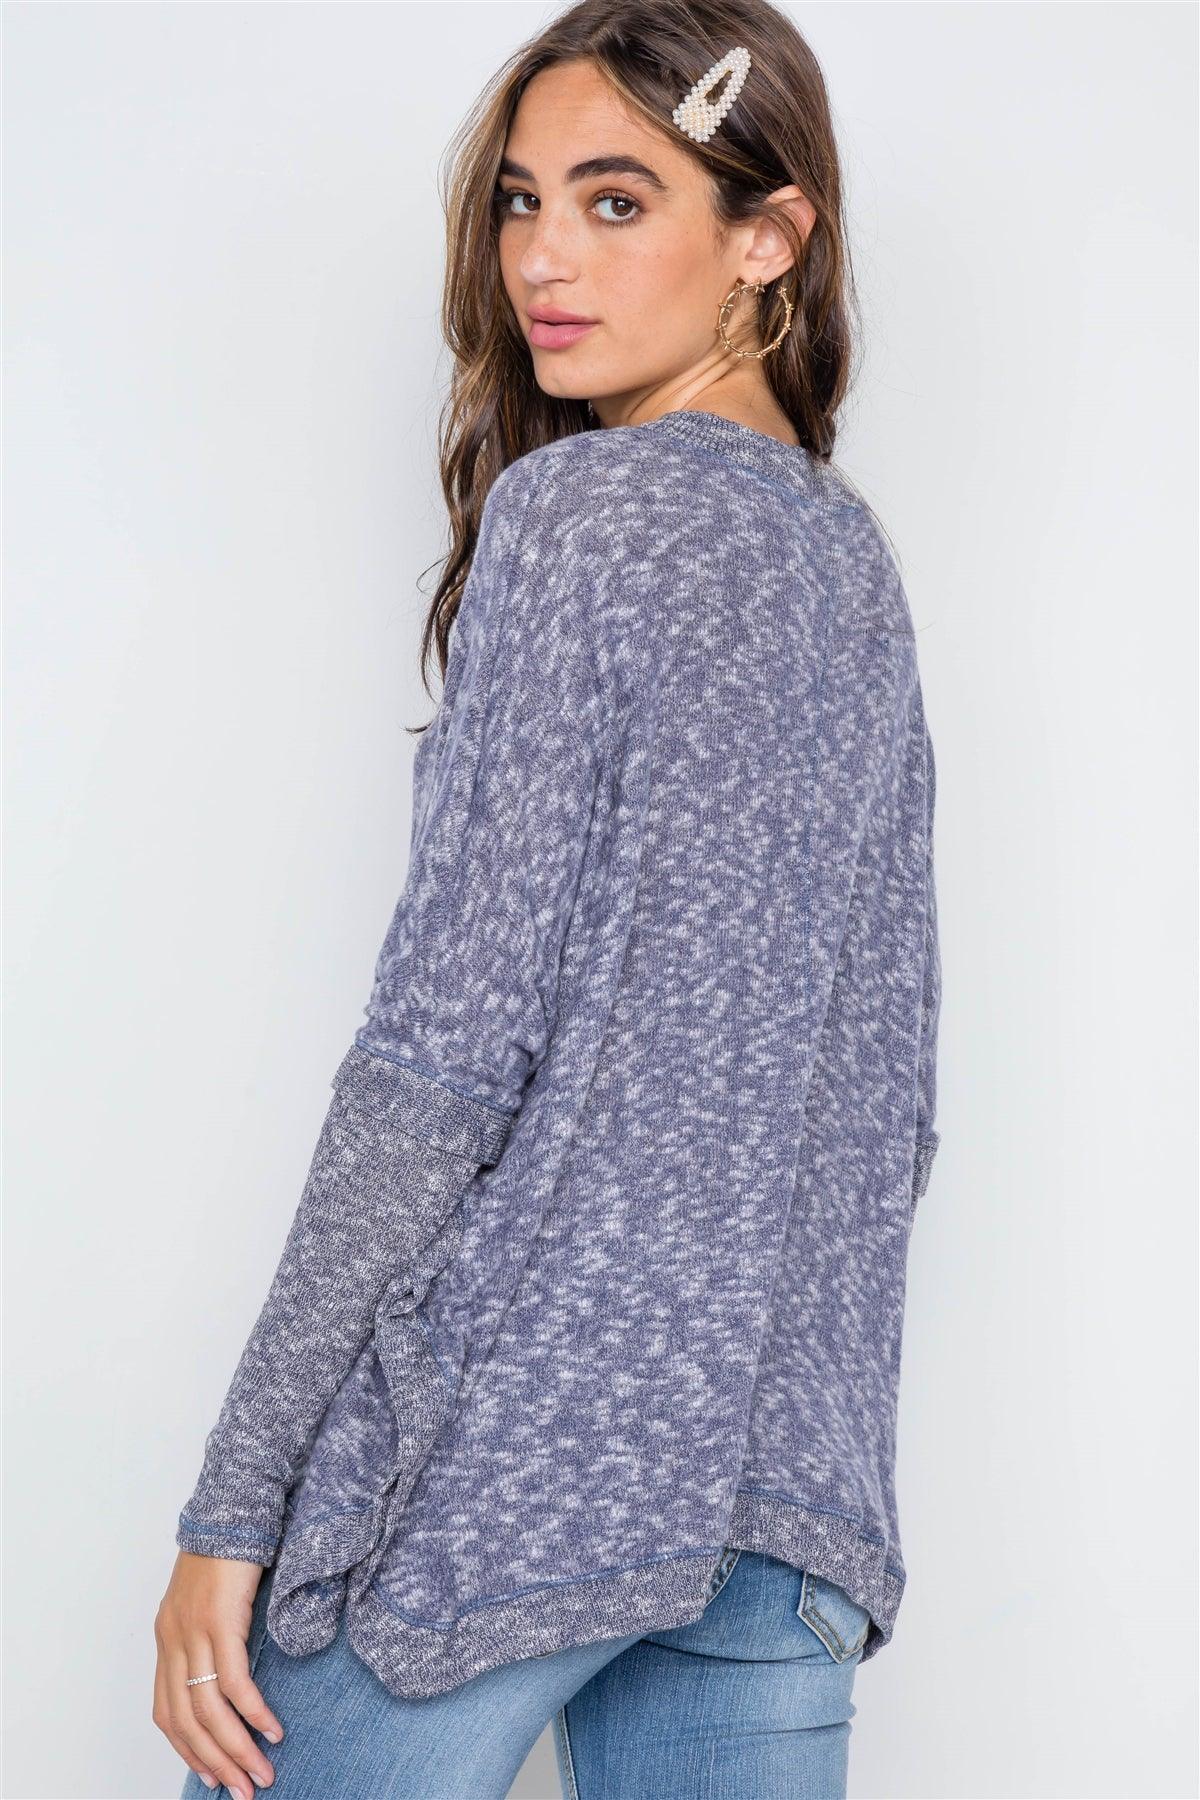 Navy Heathered Dolman Sleeves Knit Sweater Top / 2-2-2